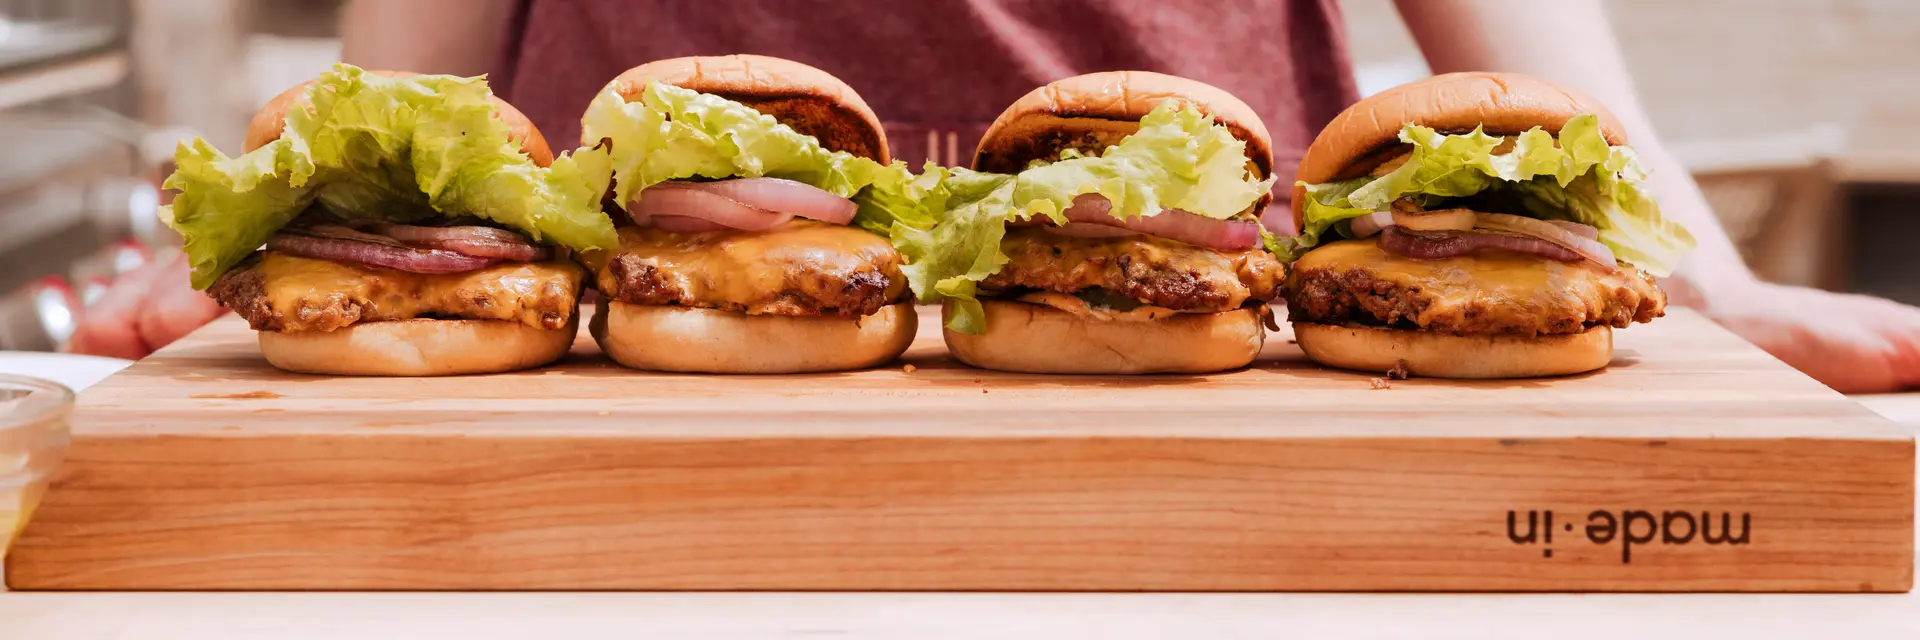 A person is holding a wooden board with three appetizing burgers lined up on it.